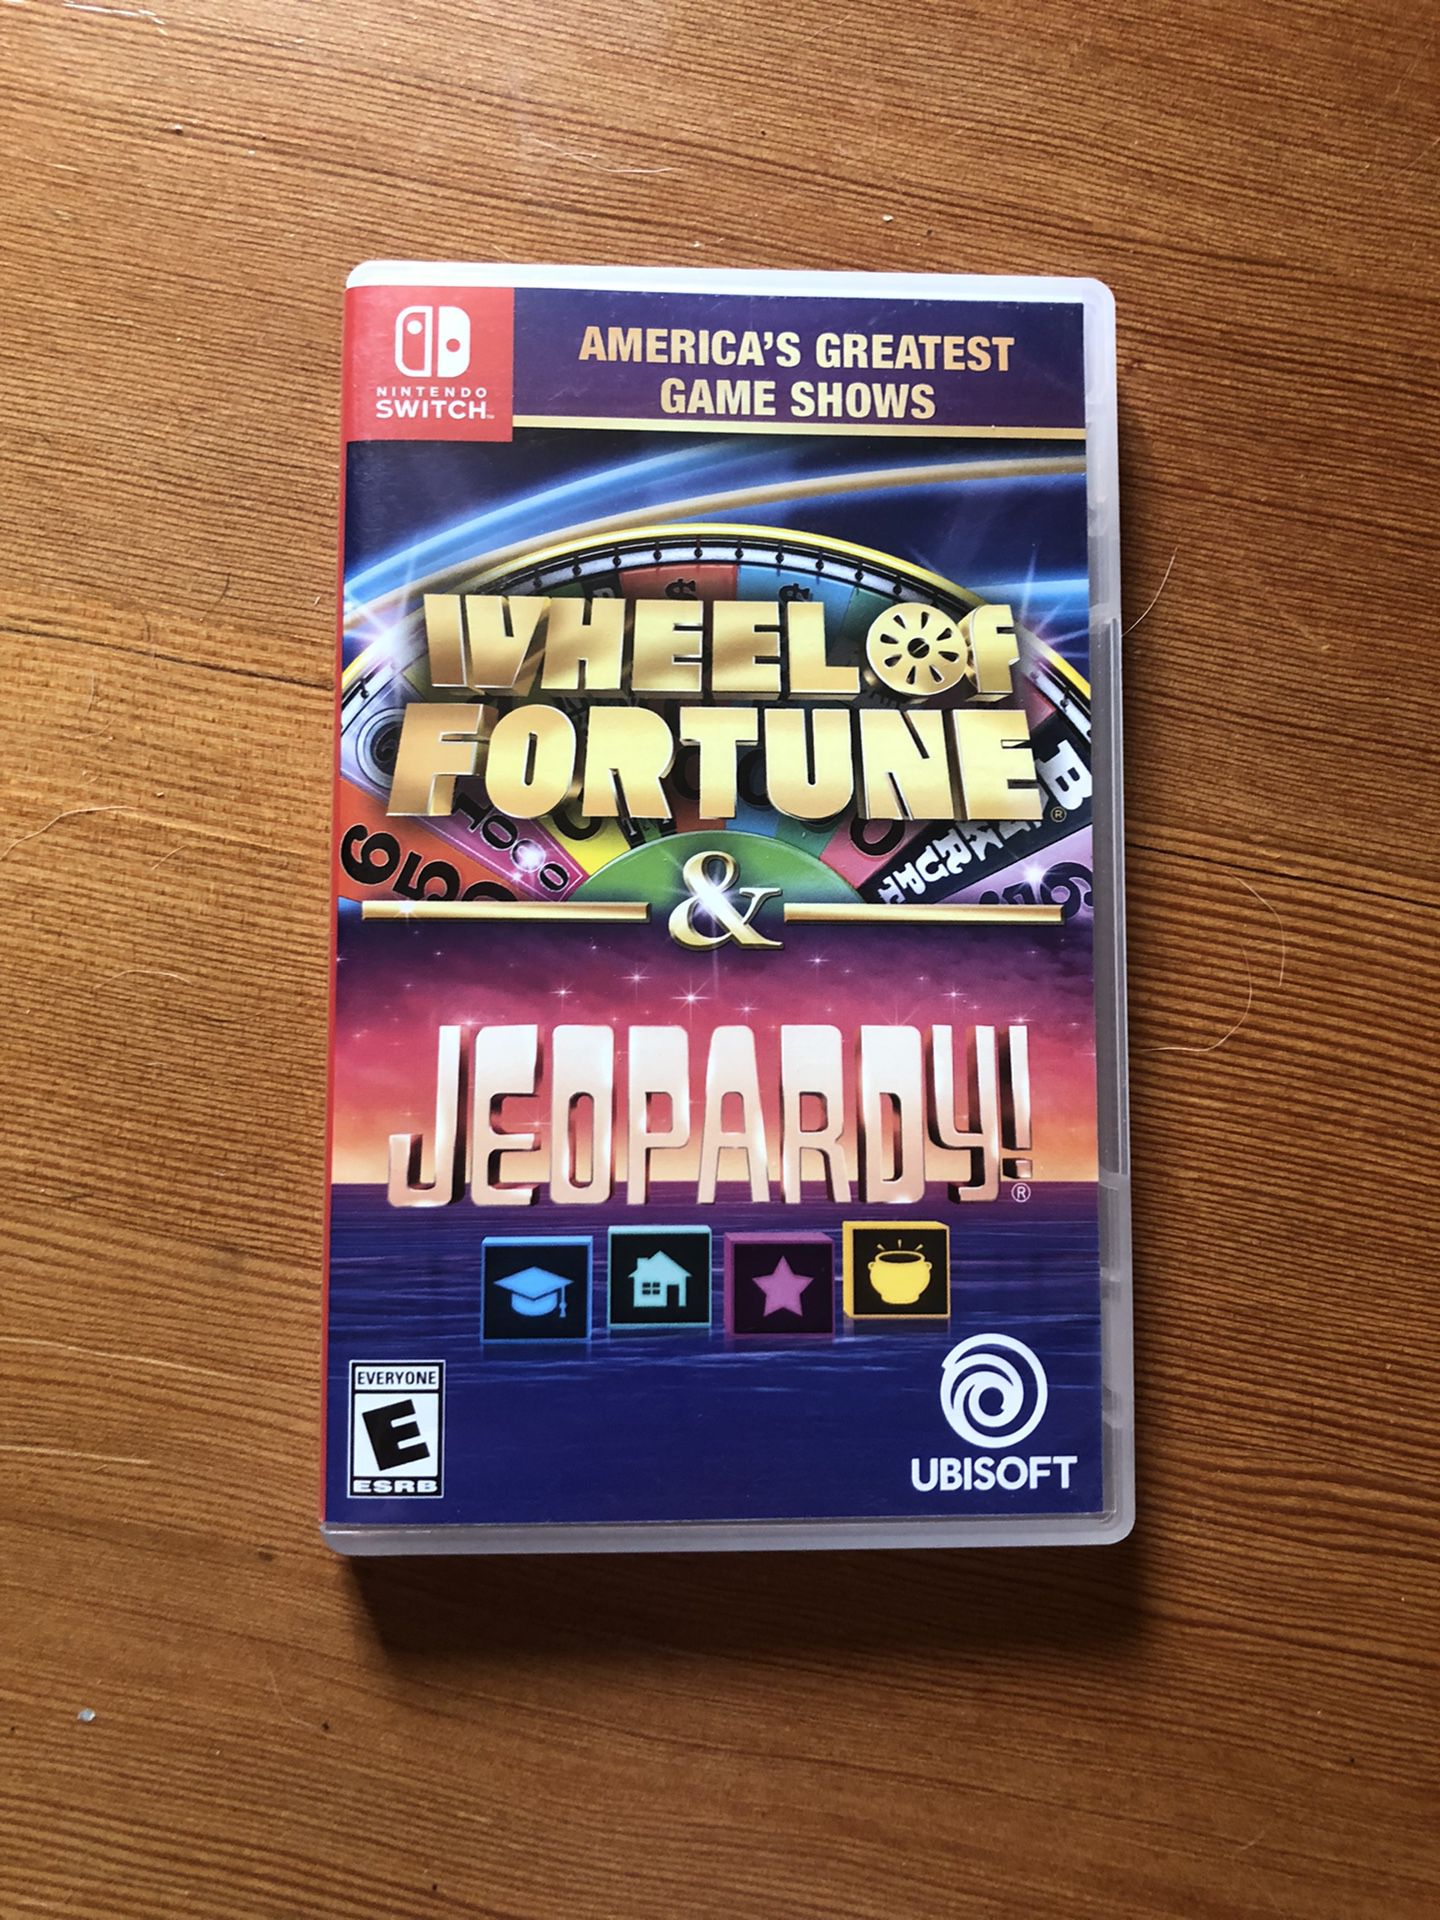 Nintendo Switch Games + Cases